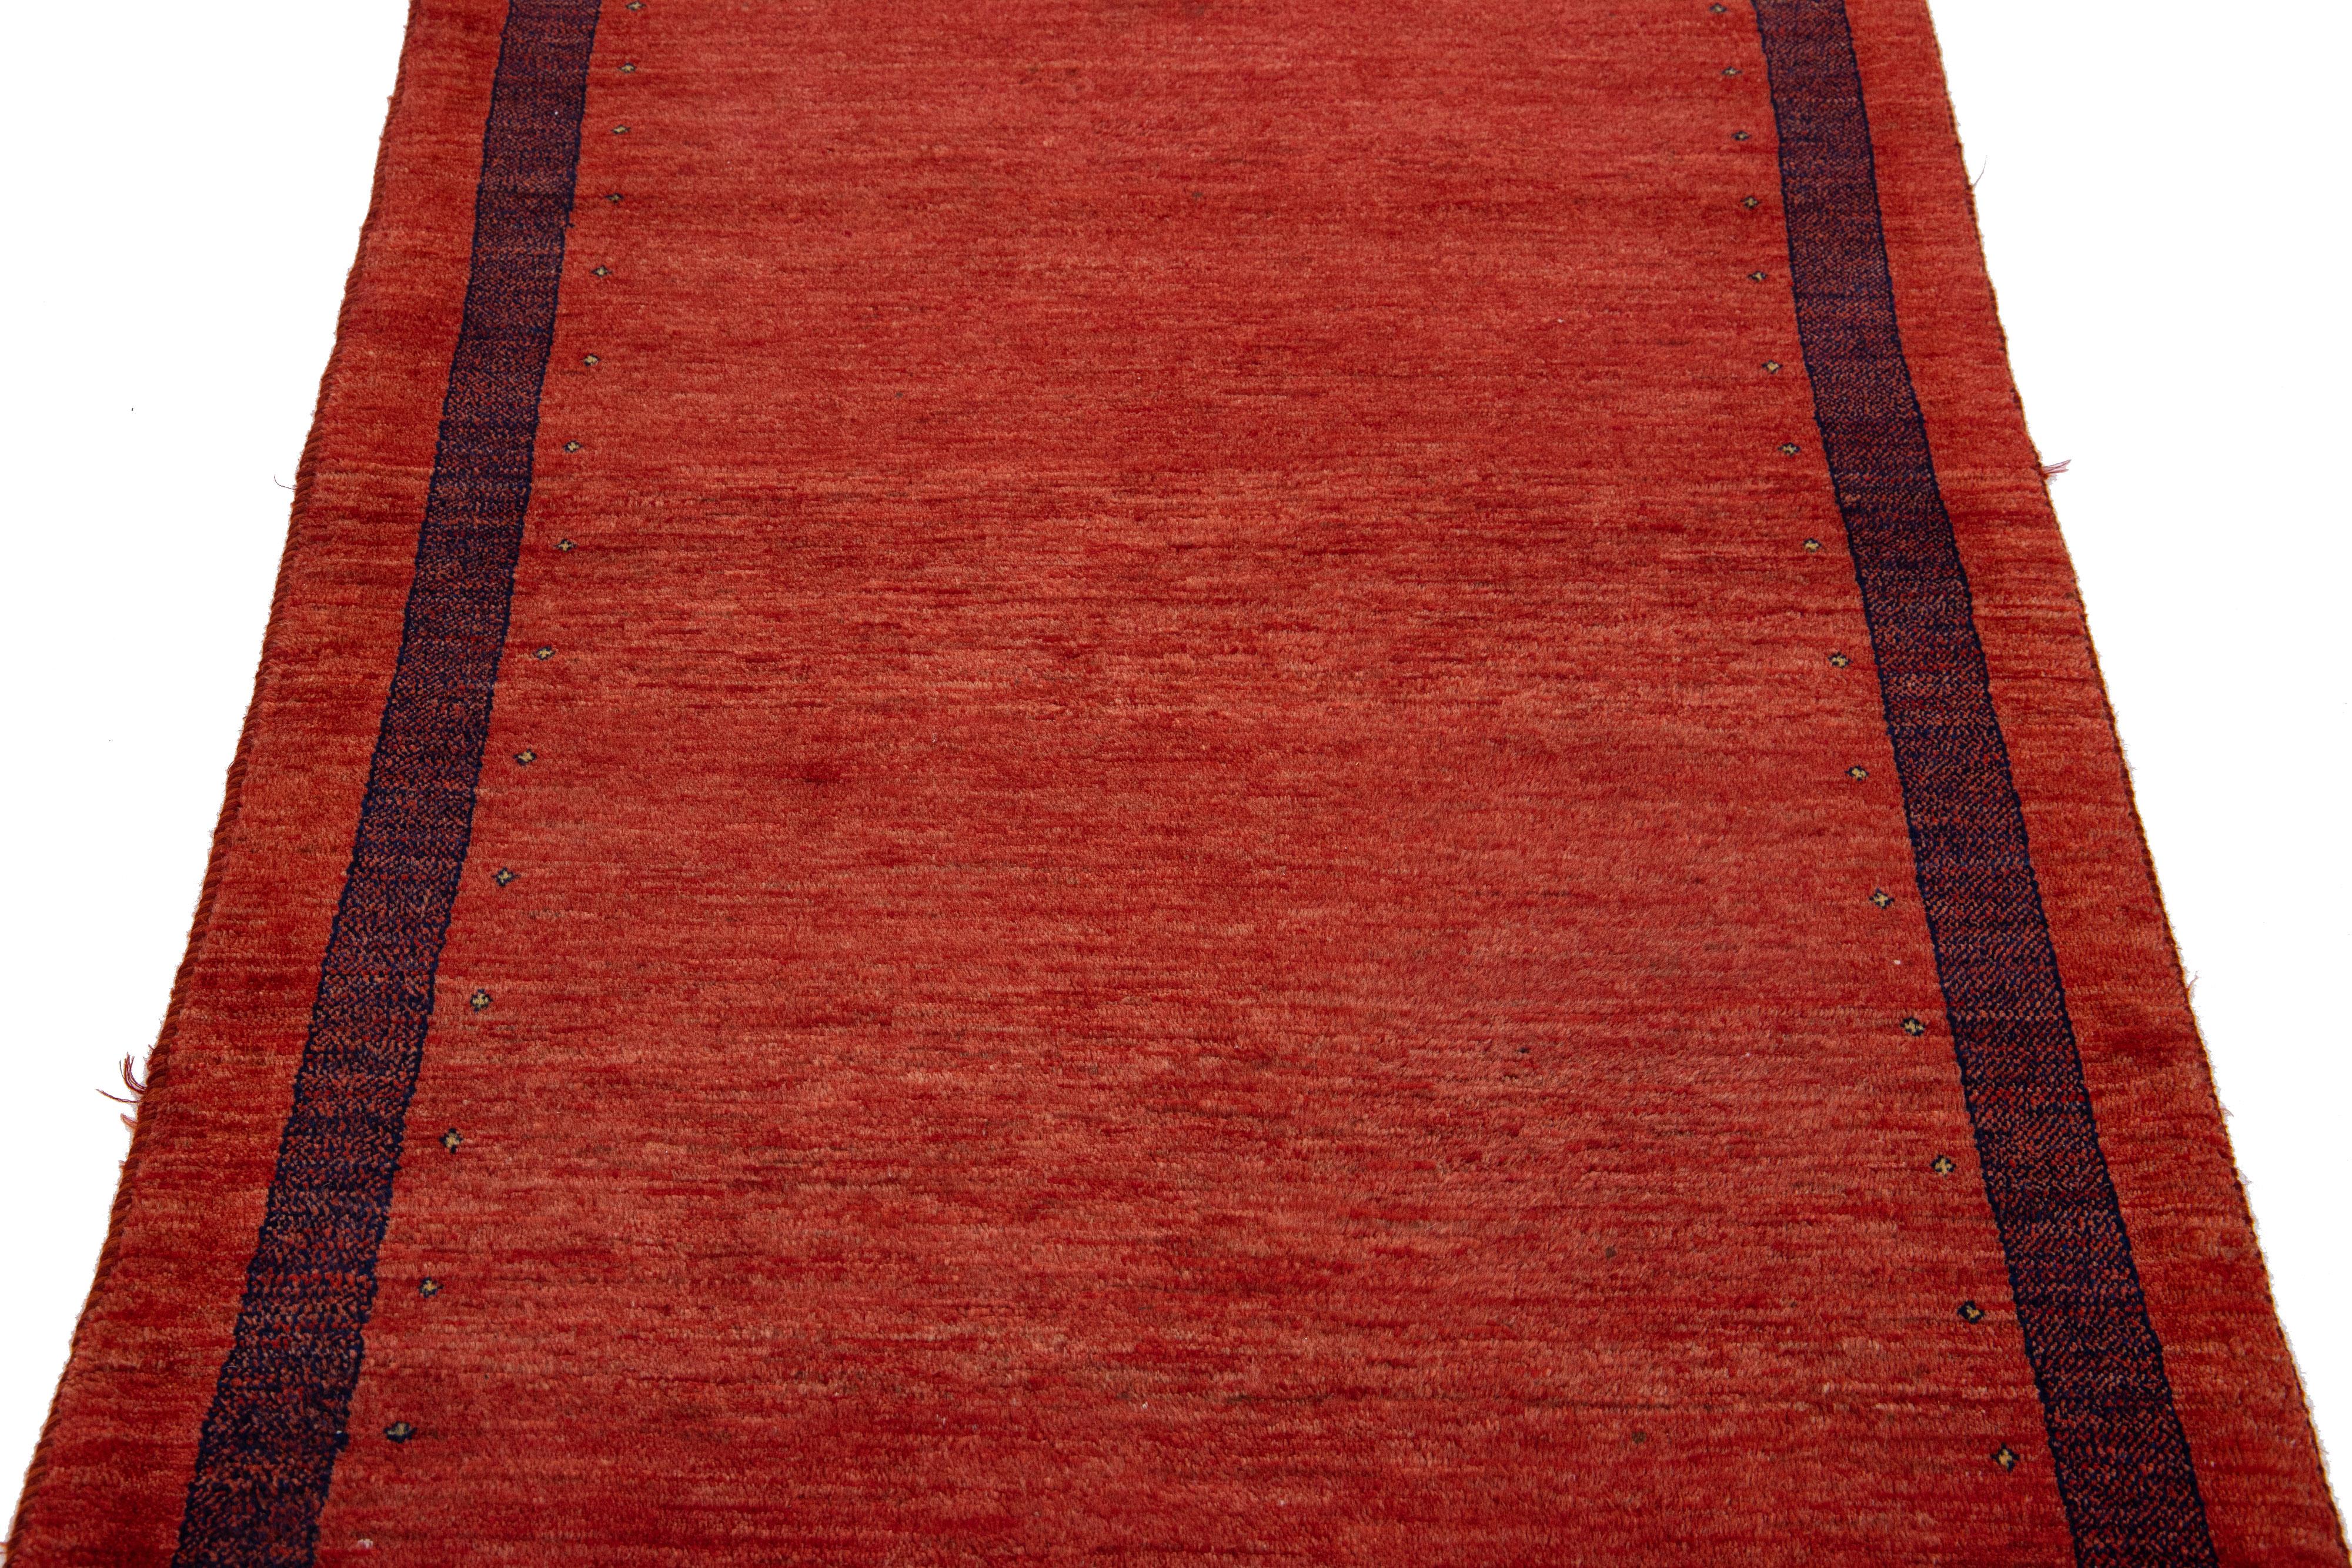 Beautiful modern Gabbeh-style hand-woven wool rug with a red color field. This Persian rug has a gorgeously minimalist design with black accents.

This rug measures: 3'6